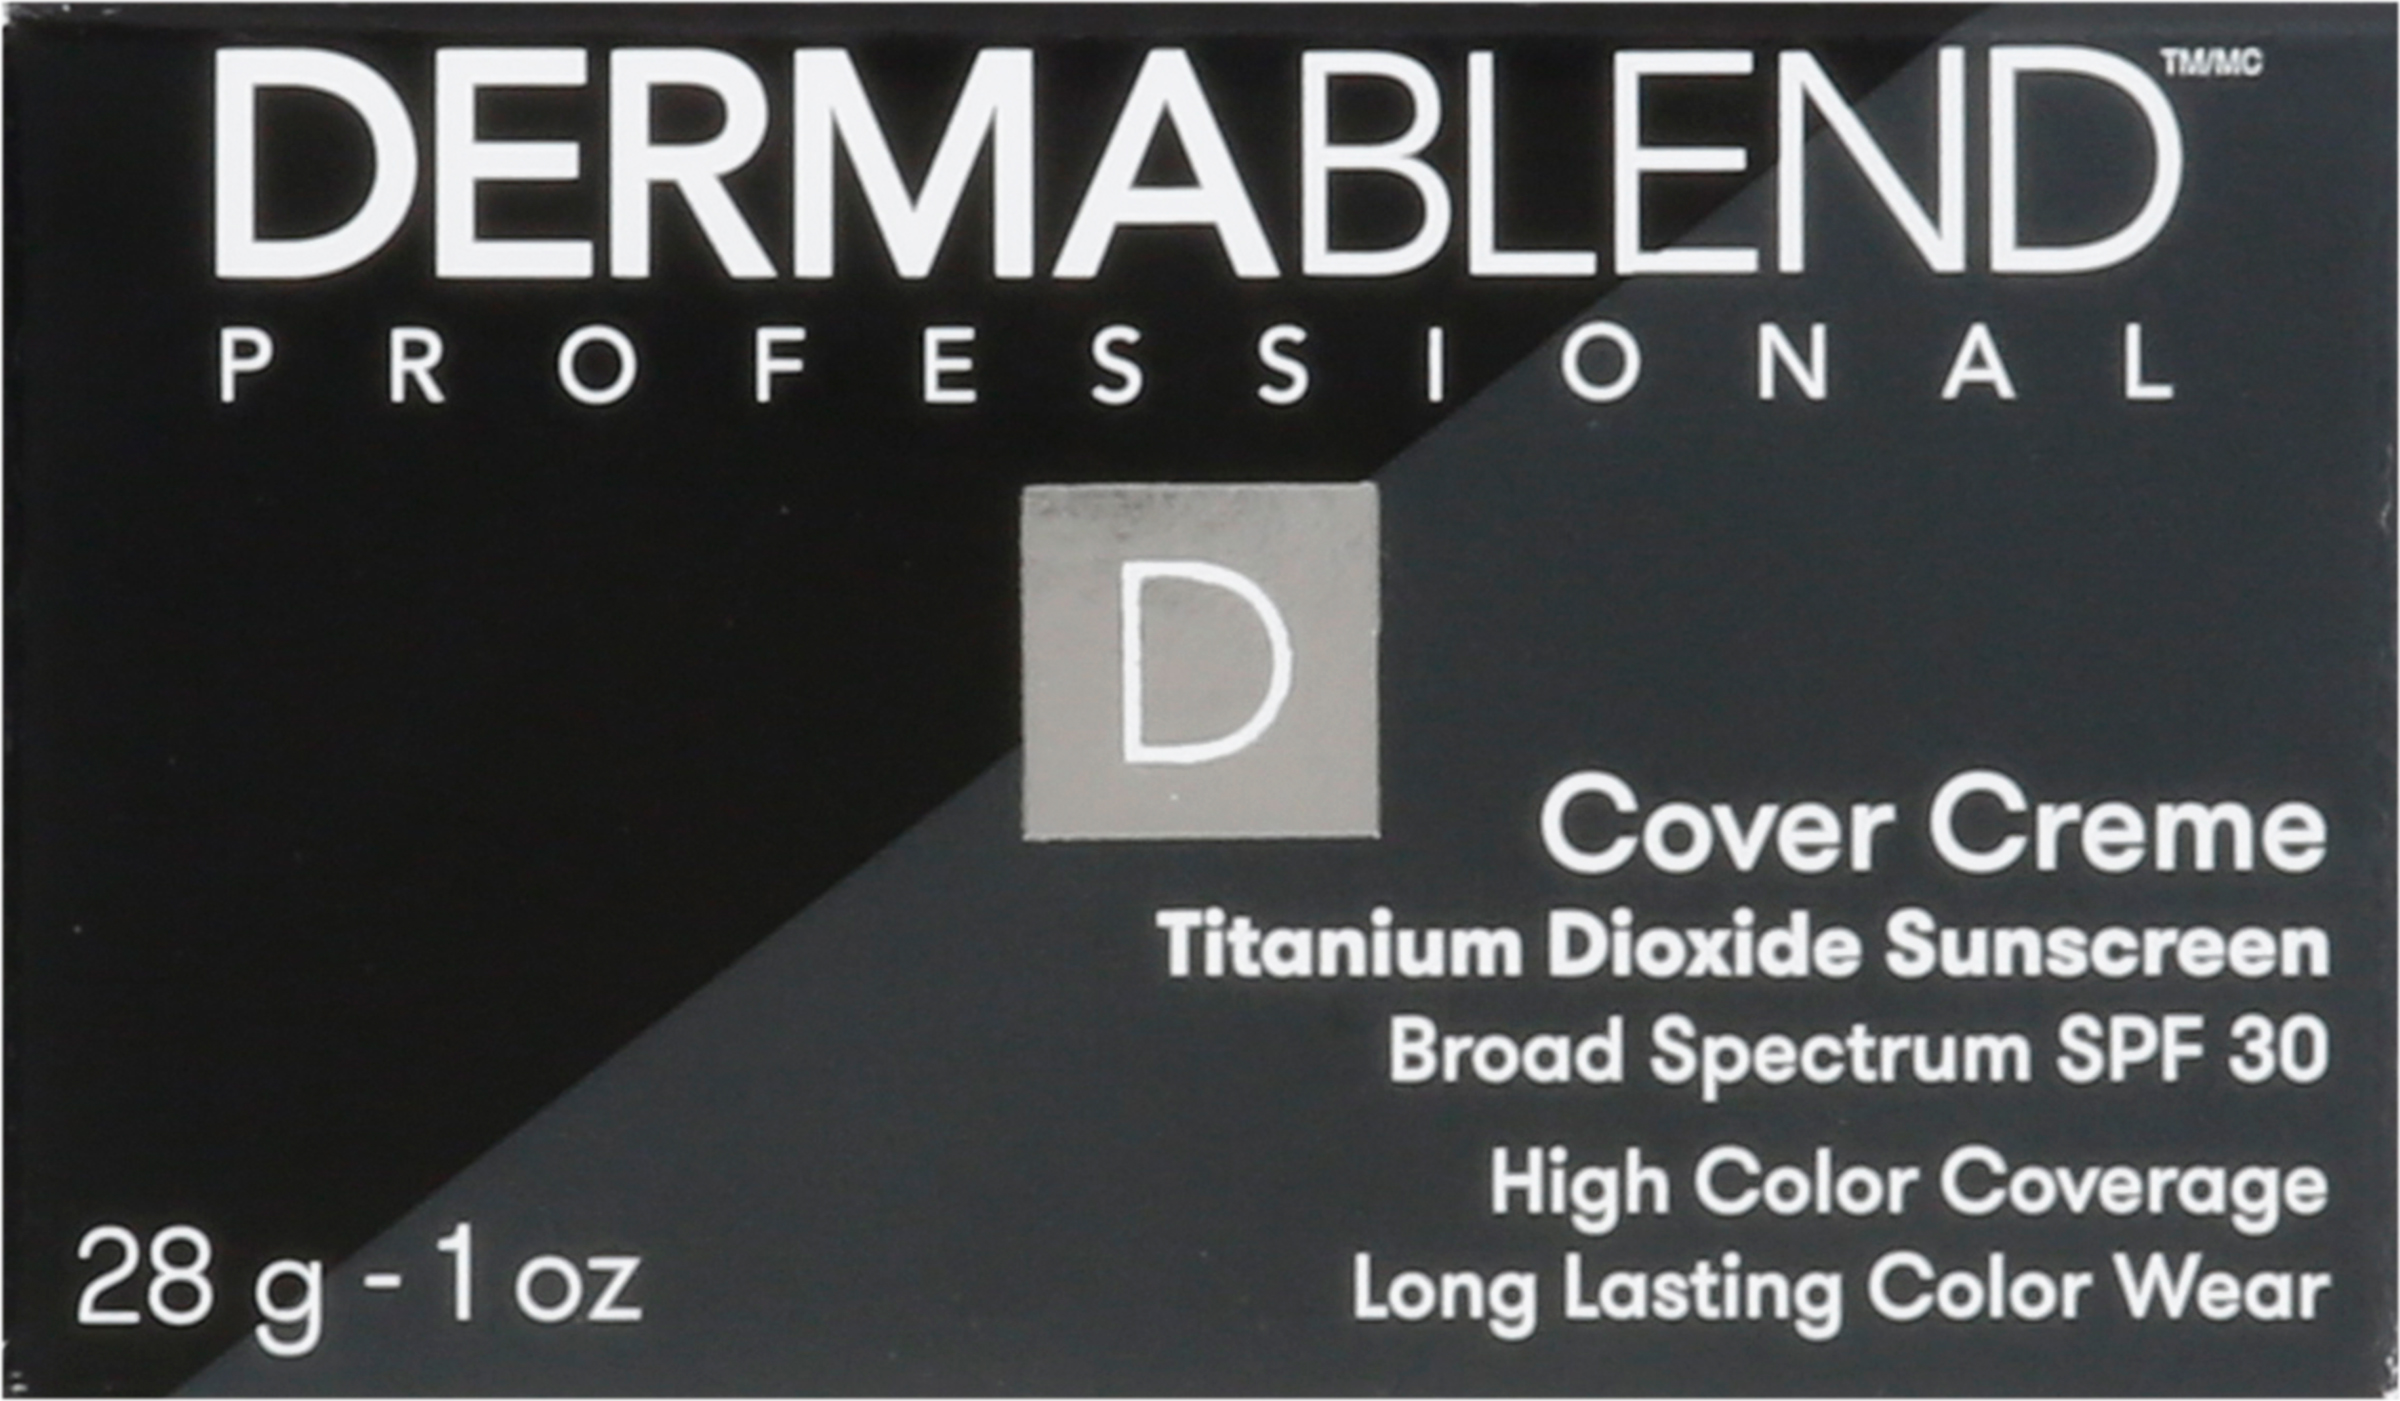 Dermablend Cover Creme Foundation SPF 30-Chocolate Brown (Chroma 6) - image 2 of 3